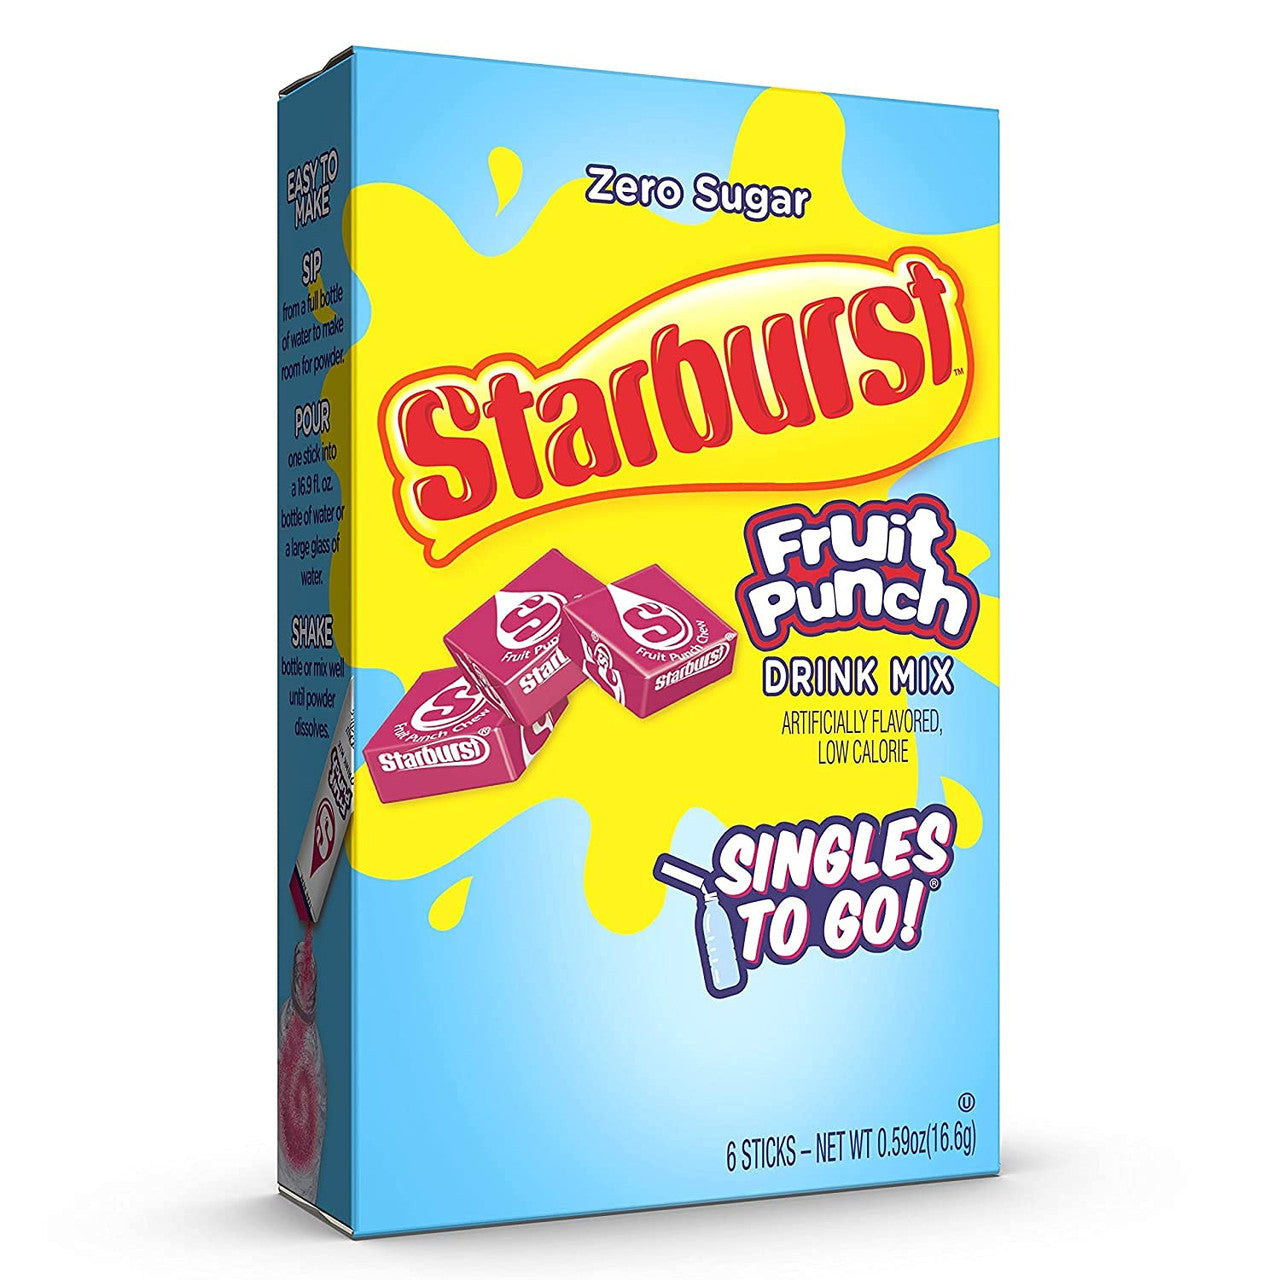 Starburst Zero Sugar Fruit Punch Drink Mix, 6 packets, 16g/0.6 oz. Box {Imported from Canada}